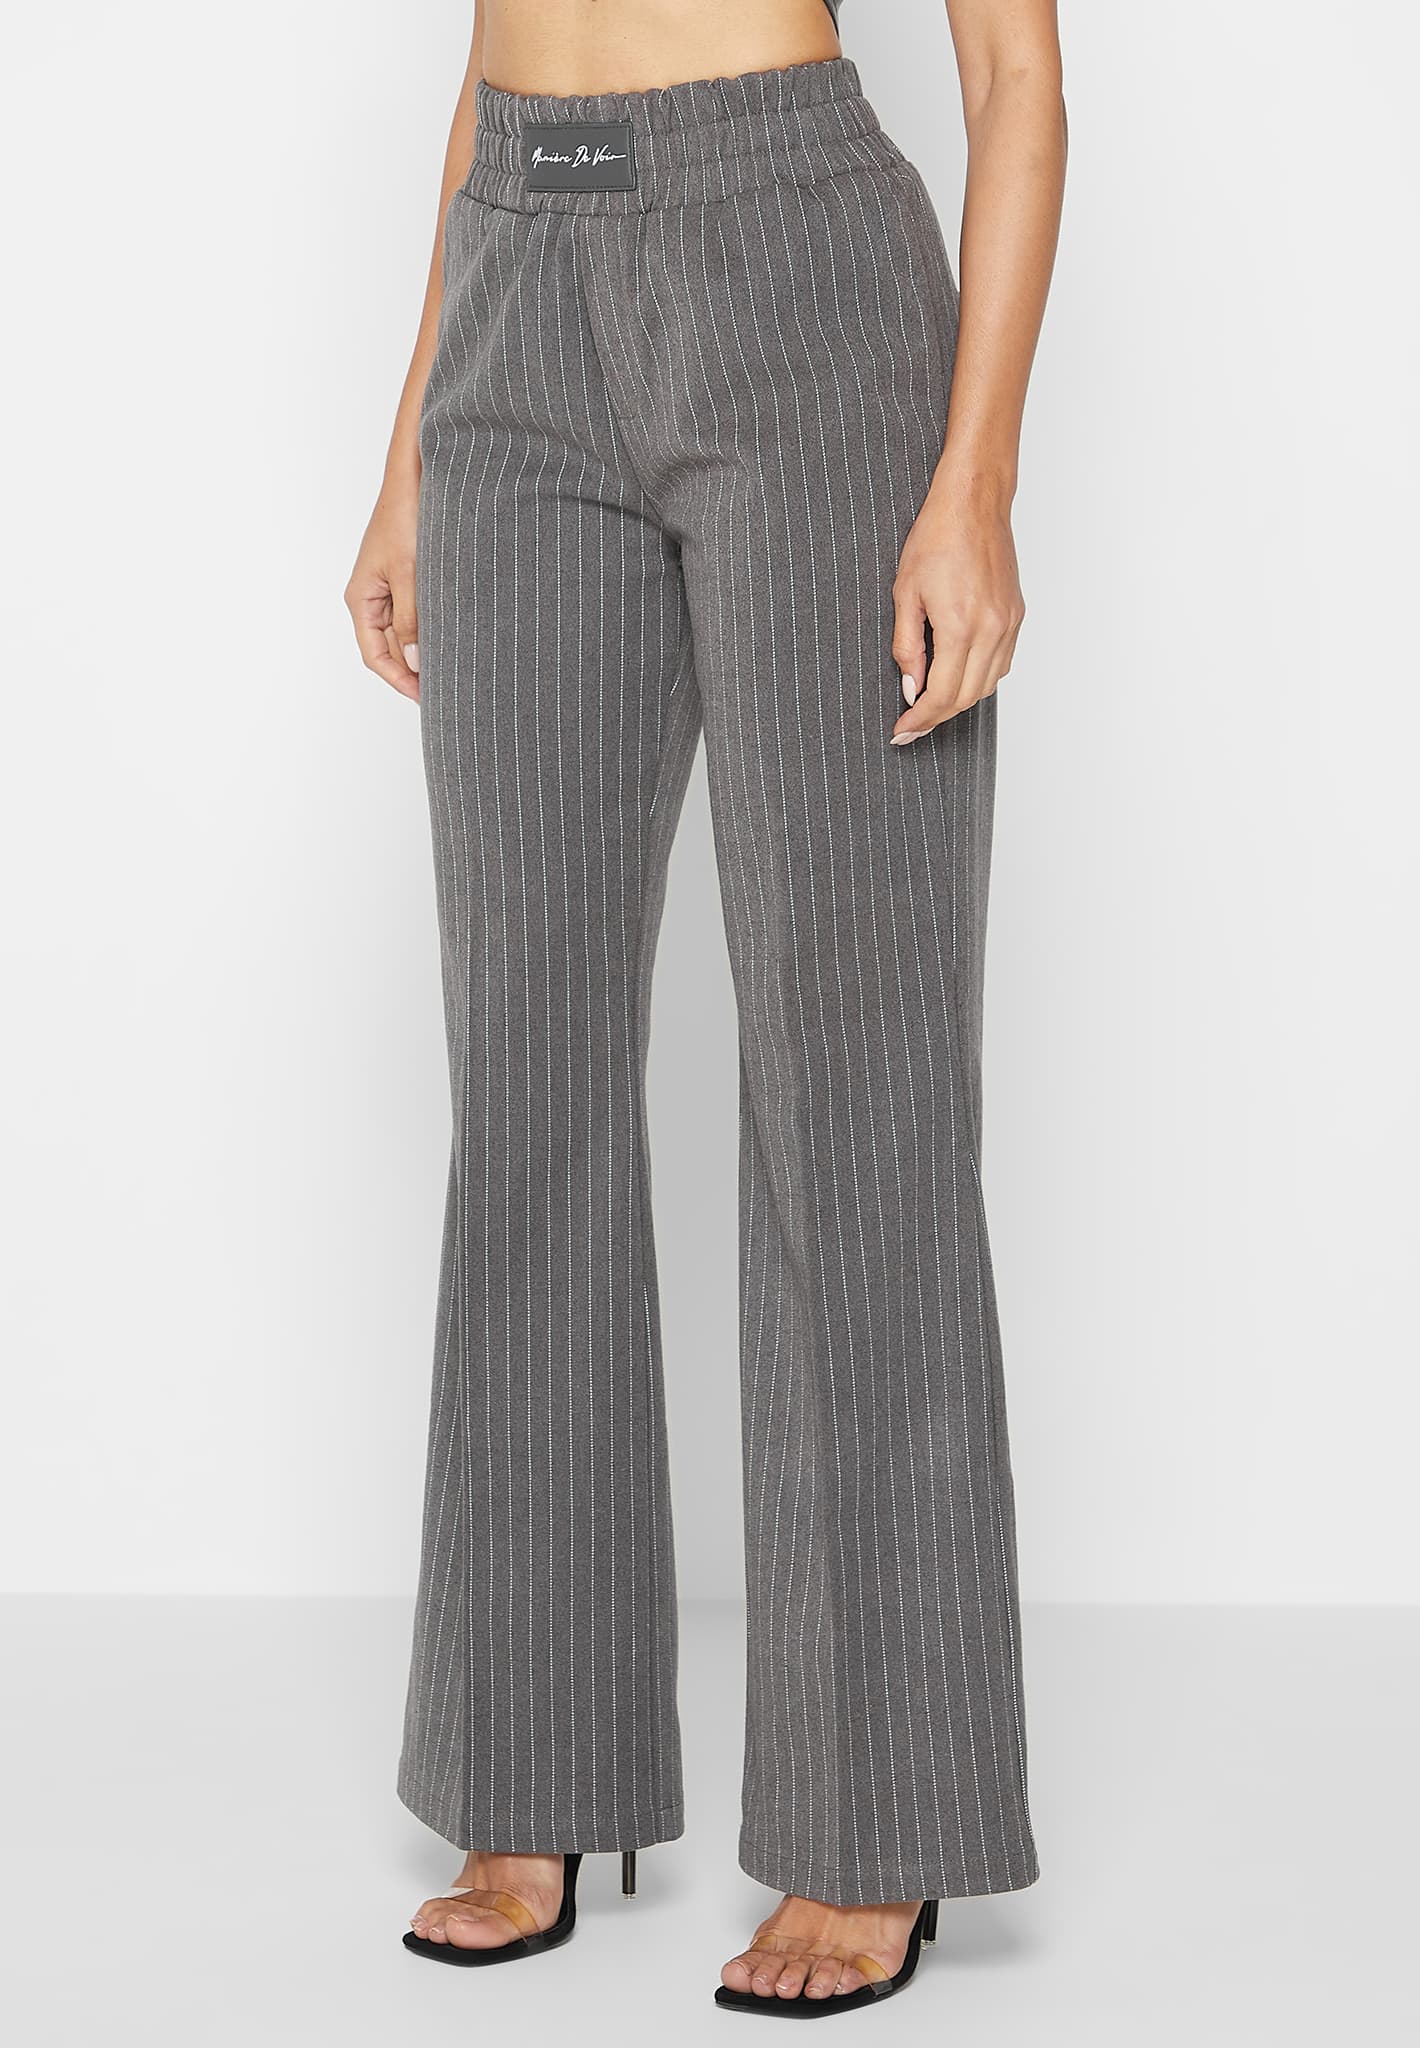 Urban Outfitters Archive Black Pinstripe Tailored Flare Trousers  Urban  Outfitters UK